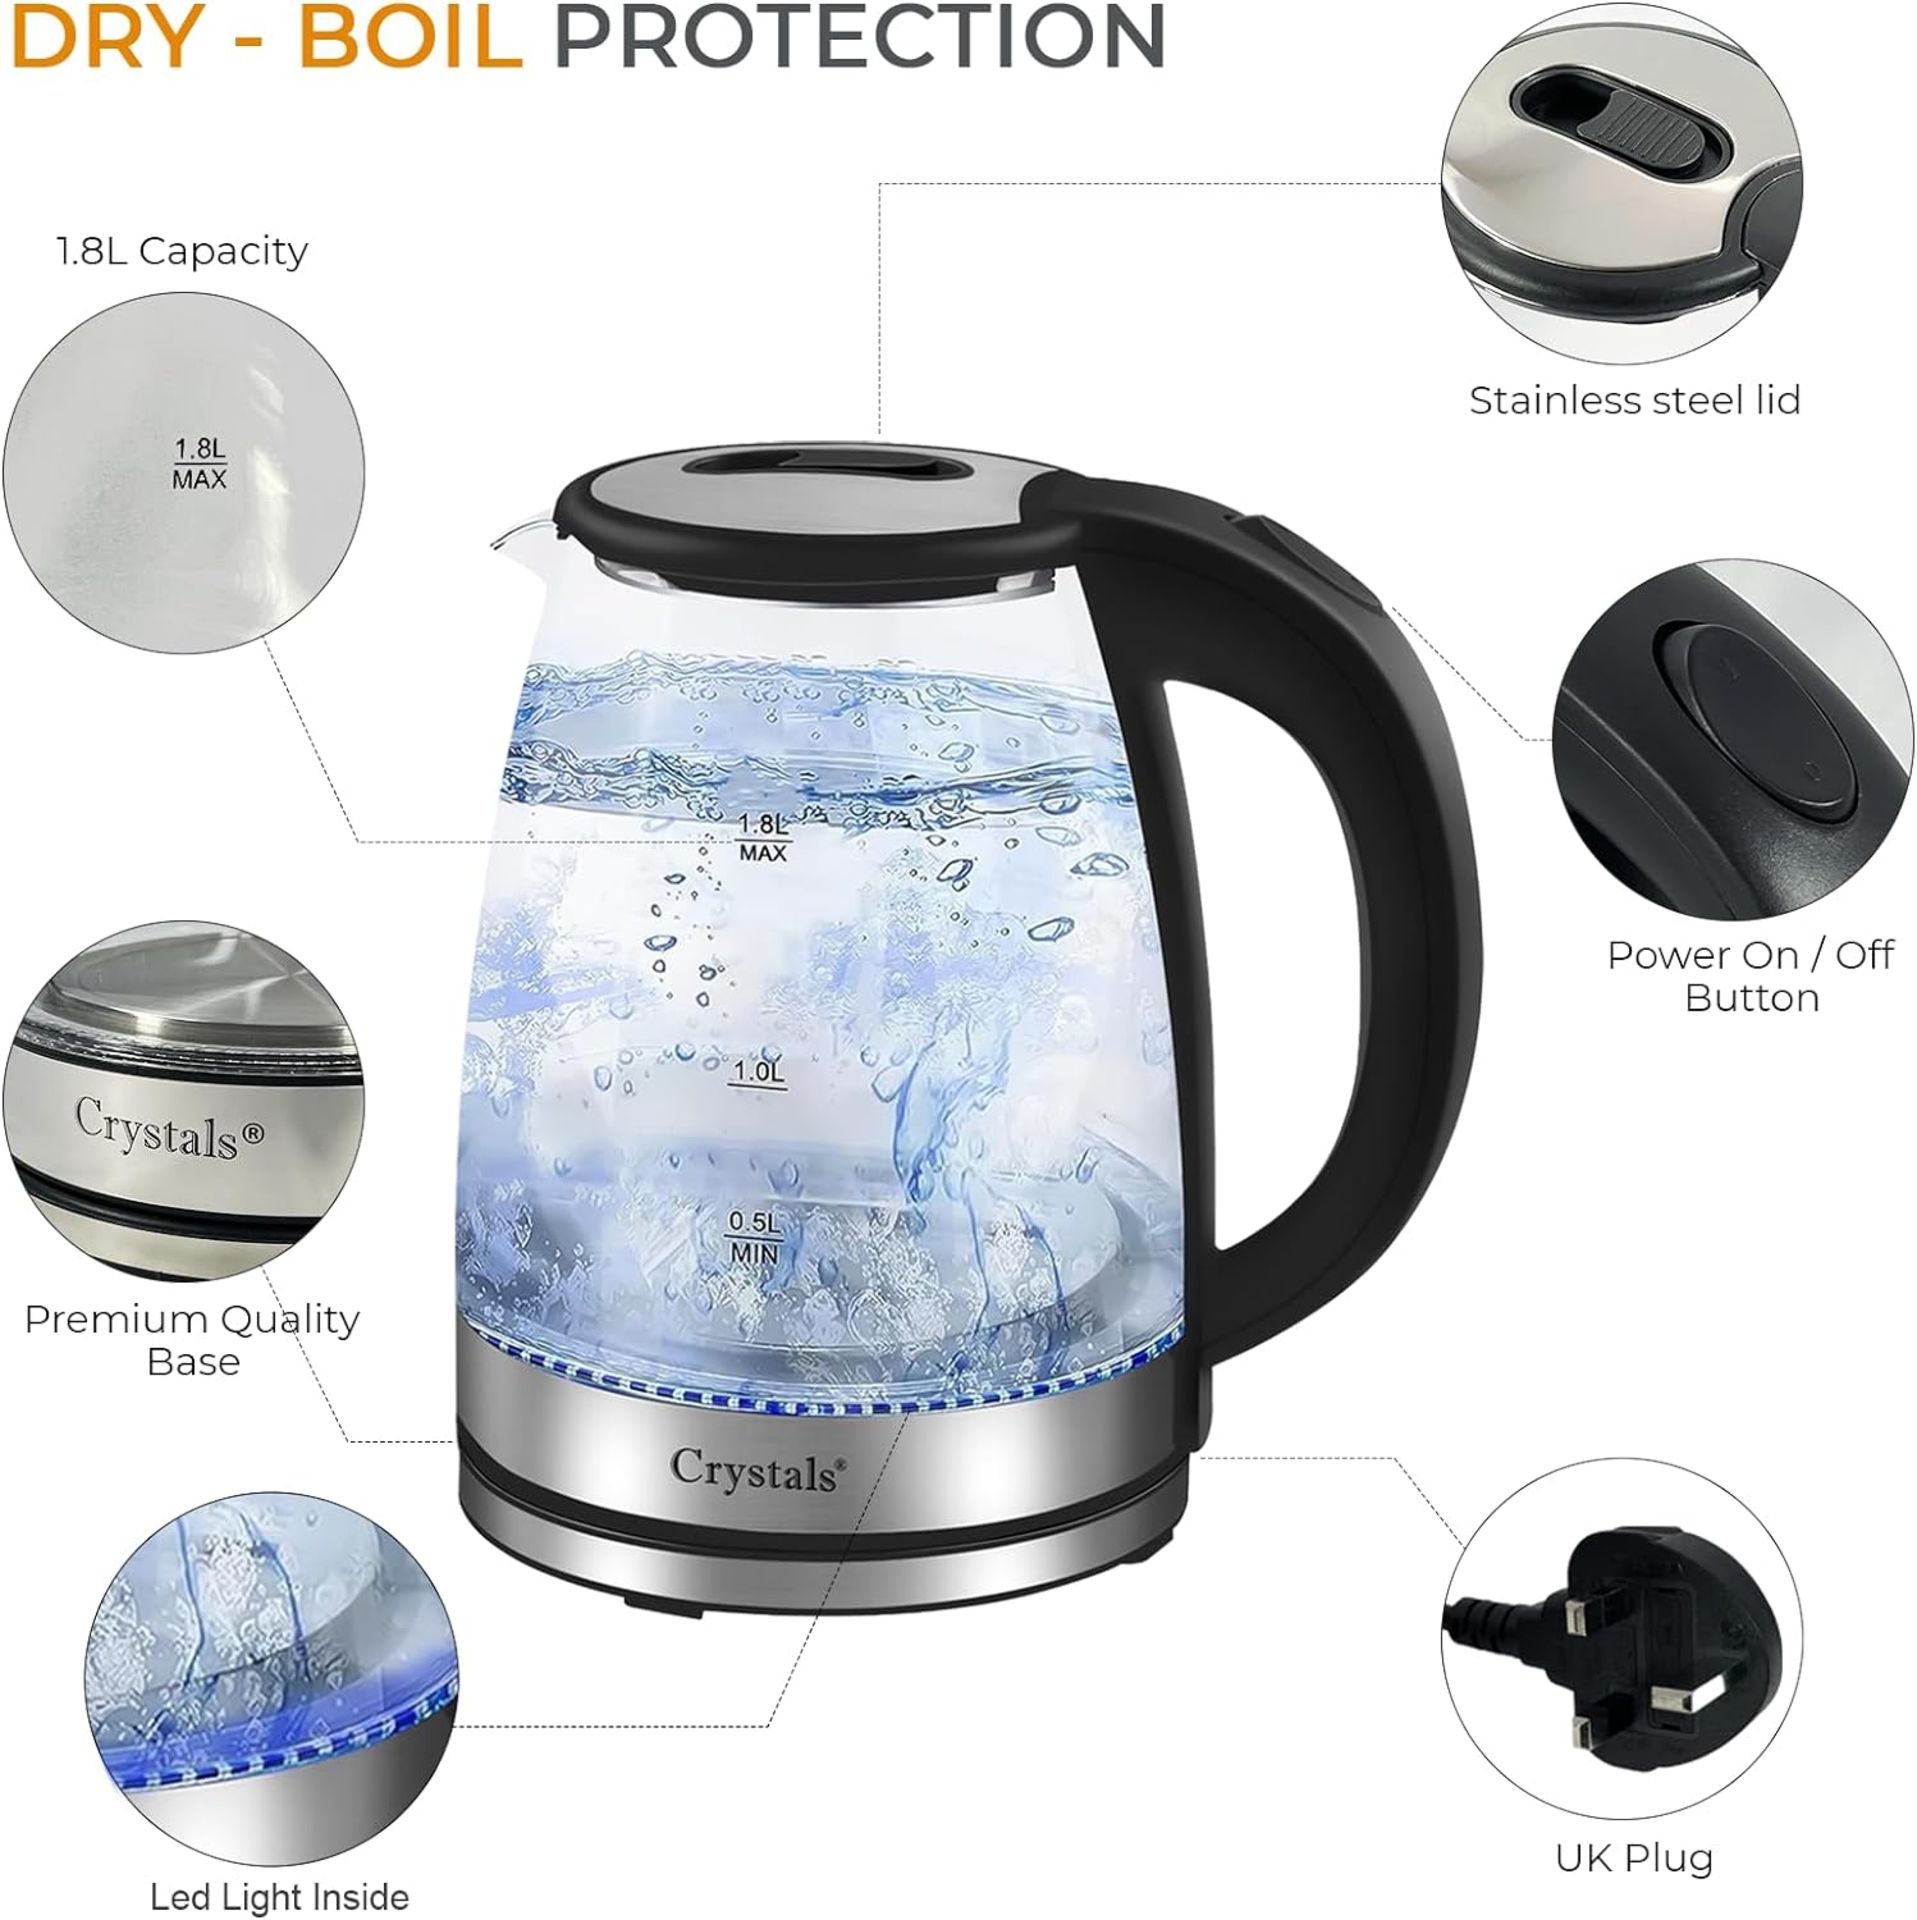 Crystals 1.8L/1500W Glass Electric Kettles, Glass Kettle With Blue LED and Boil Dry Protection, C... - Image 2 of 2